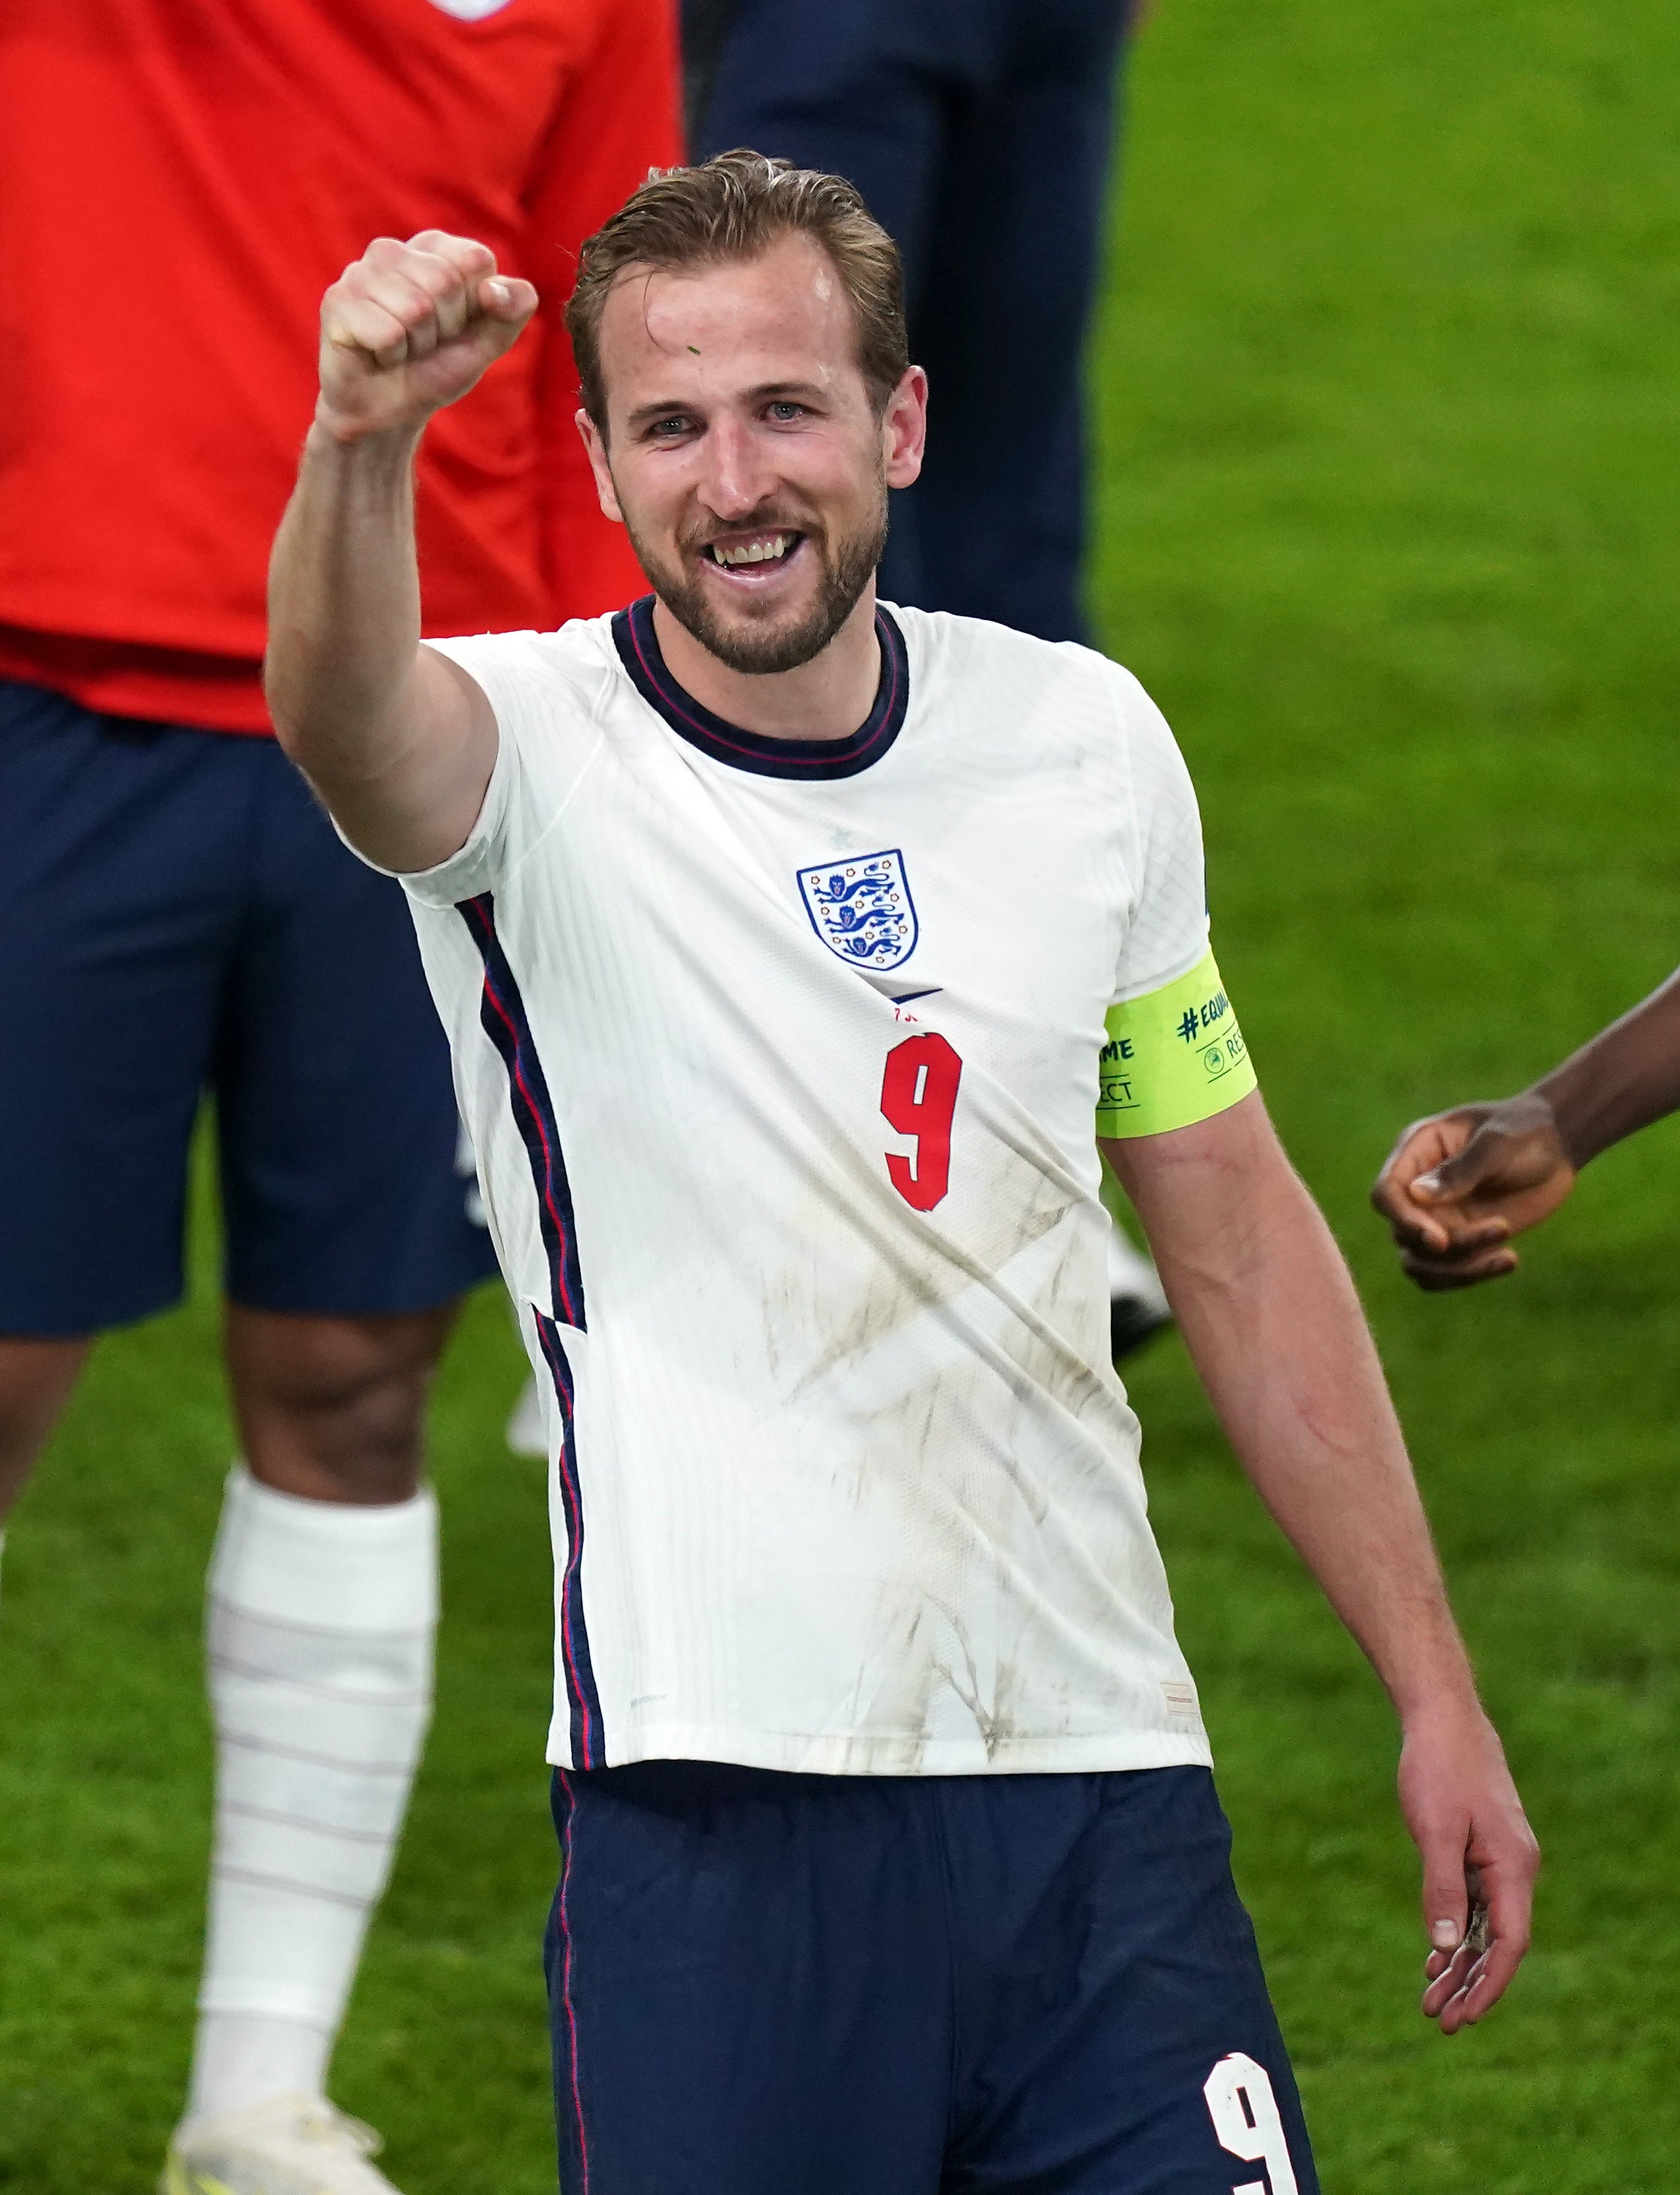 Skipper Harry Kane has scored four goals in England's run to their first major tournament final since 1966 (Mike Egerton/PA).